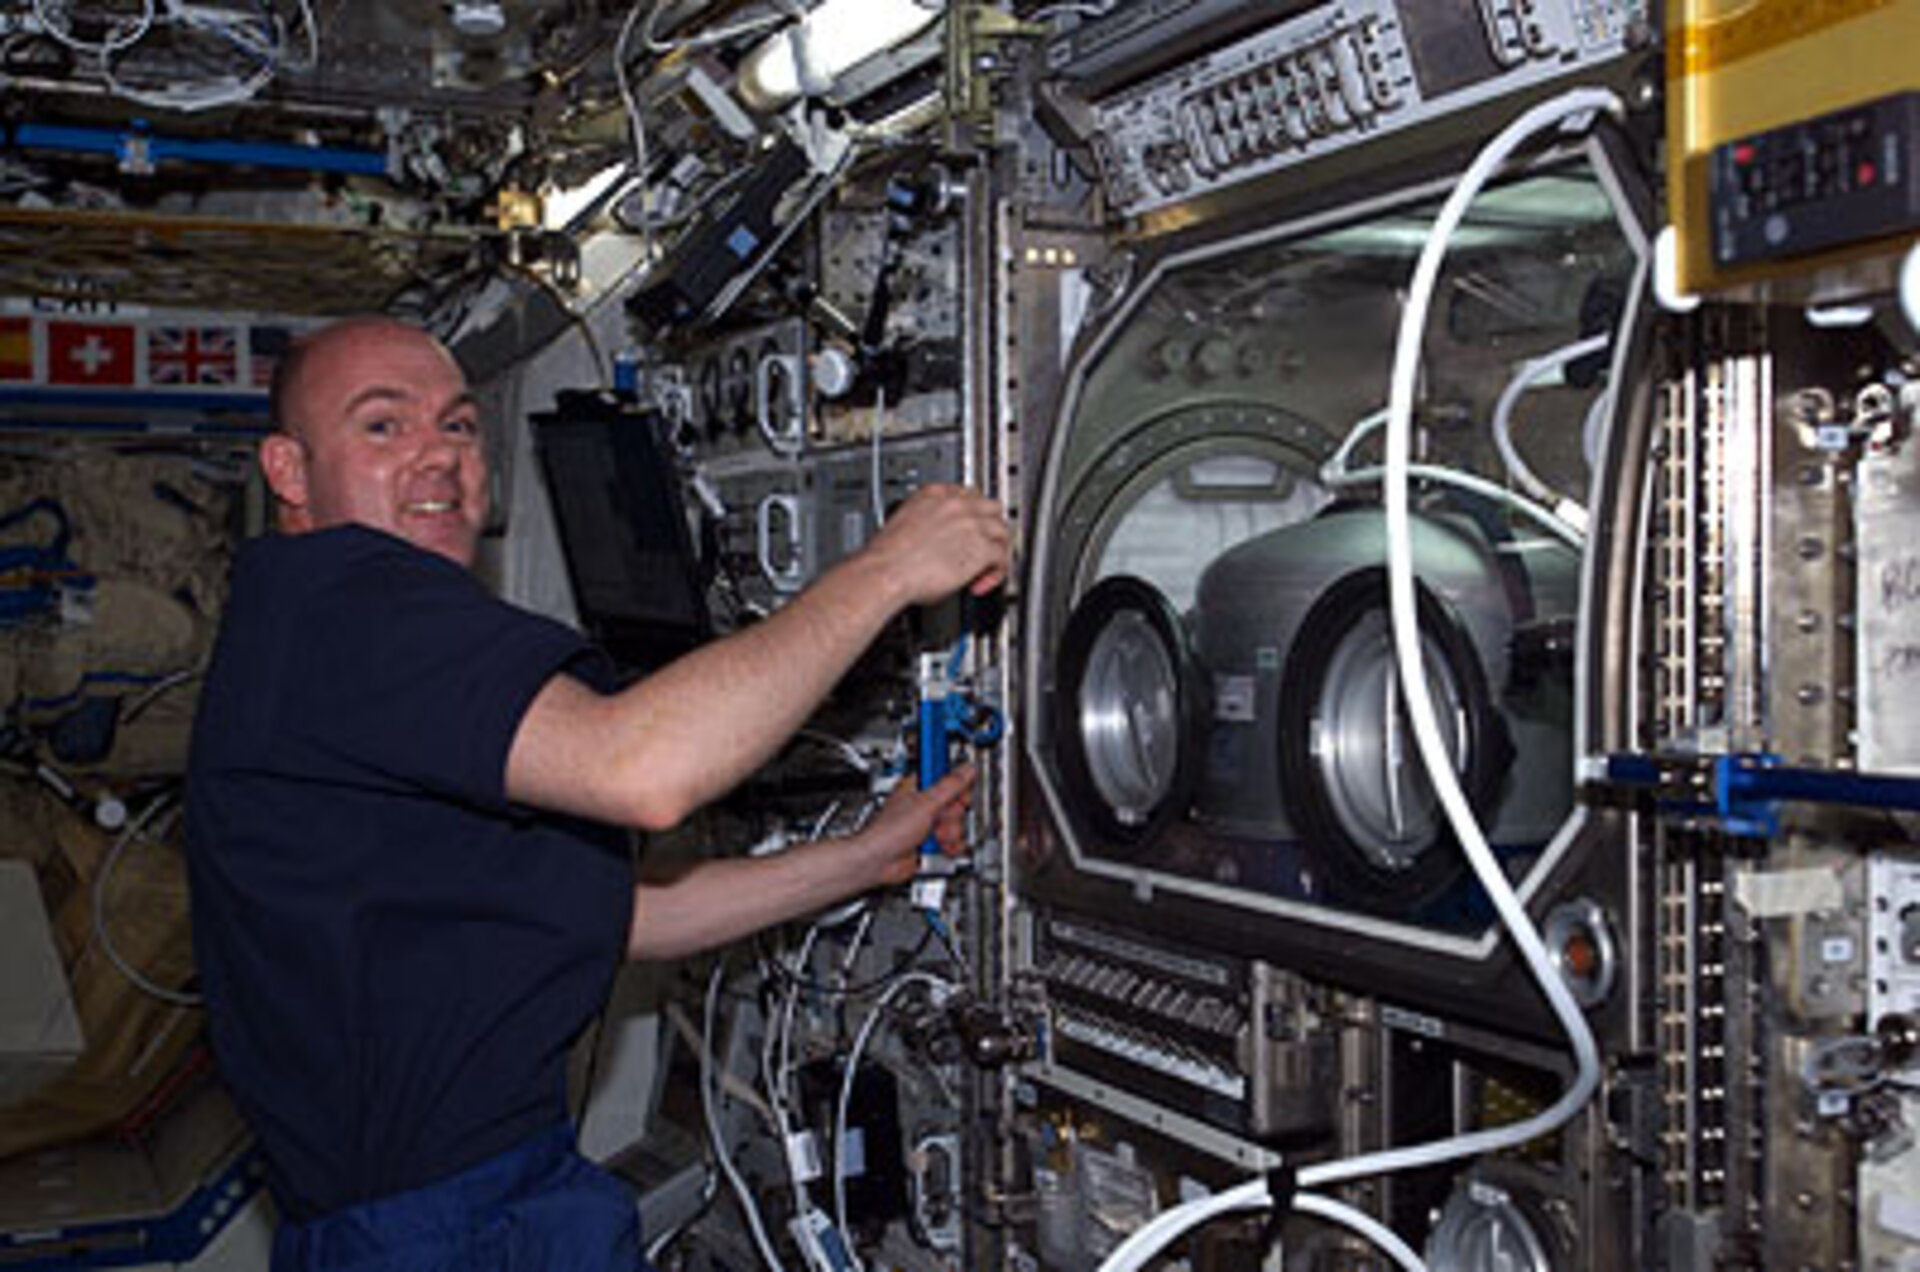 ESA astronaut André Kuipers works on the ARGES experiment